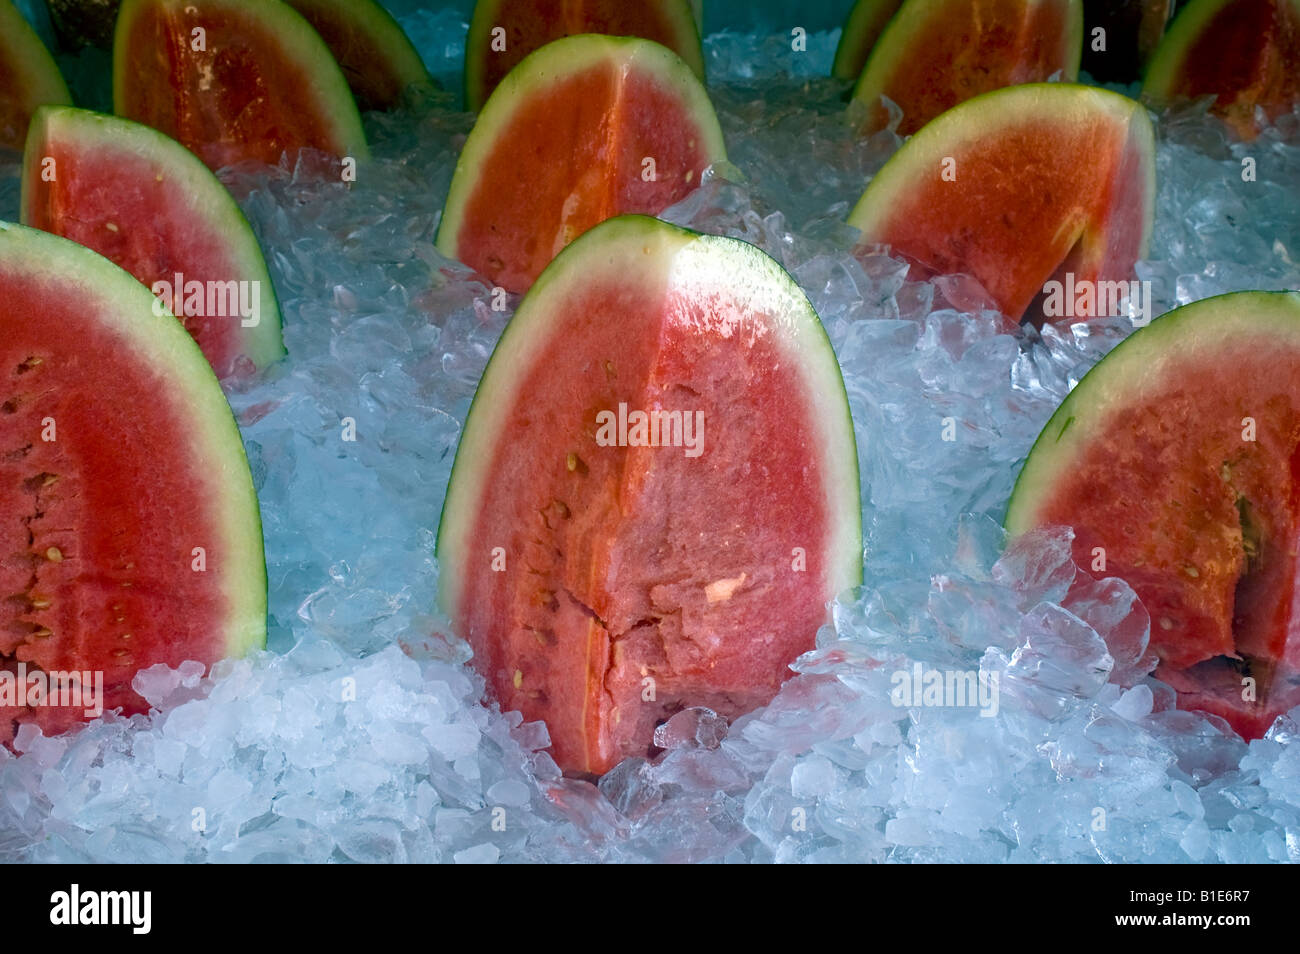 Watermelon on ice in a grocery store in New York Stock Photo